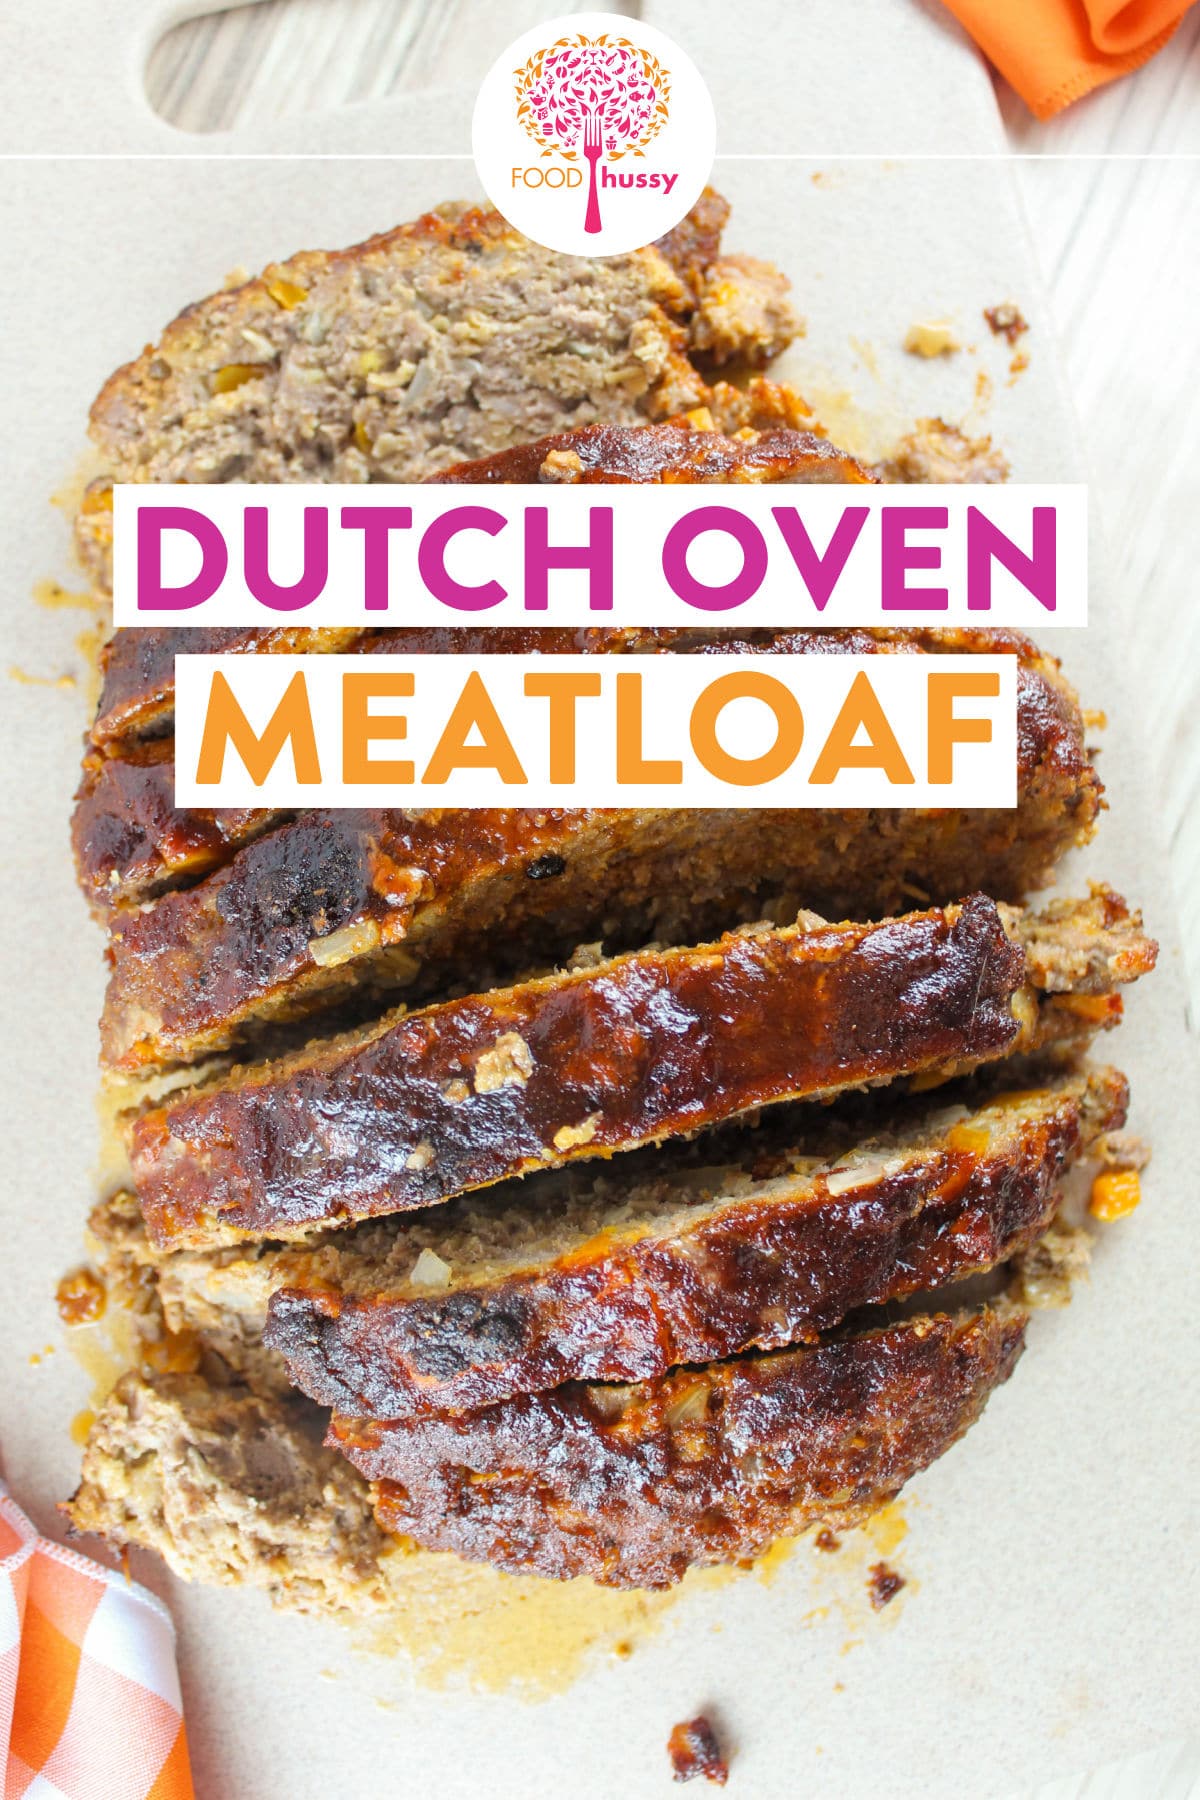 This hearty and delicious Dutch Oven Meatloaf will be a family favorite! Meatloaf is quick to put together and can be made up ahead of time and then pop in the oven when you get home!
 via @foodhussy